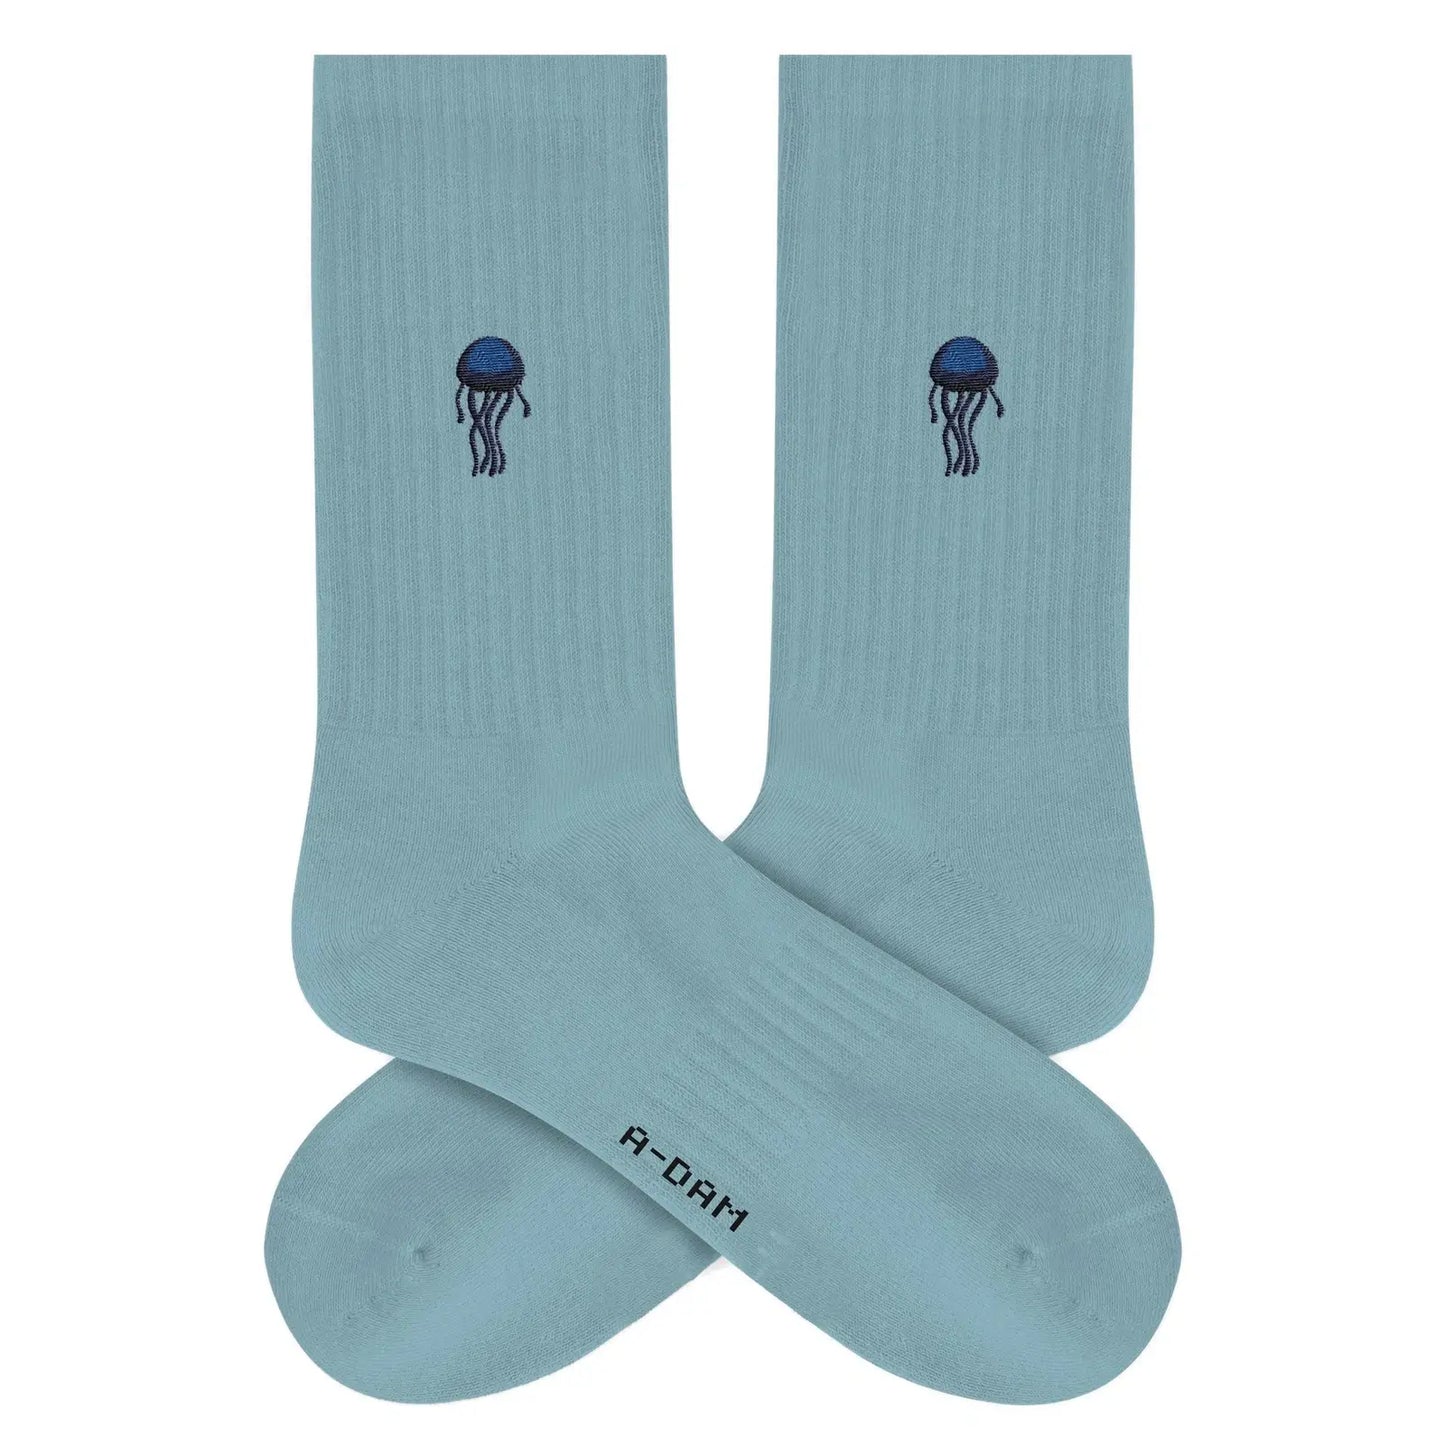 Sports socks with knitted motifs